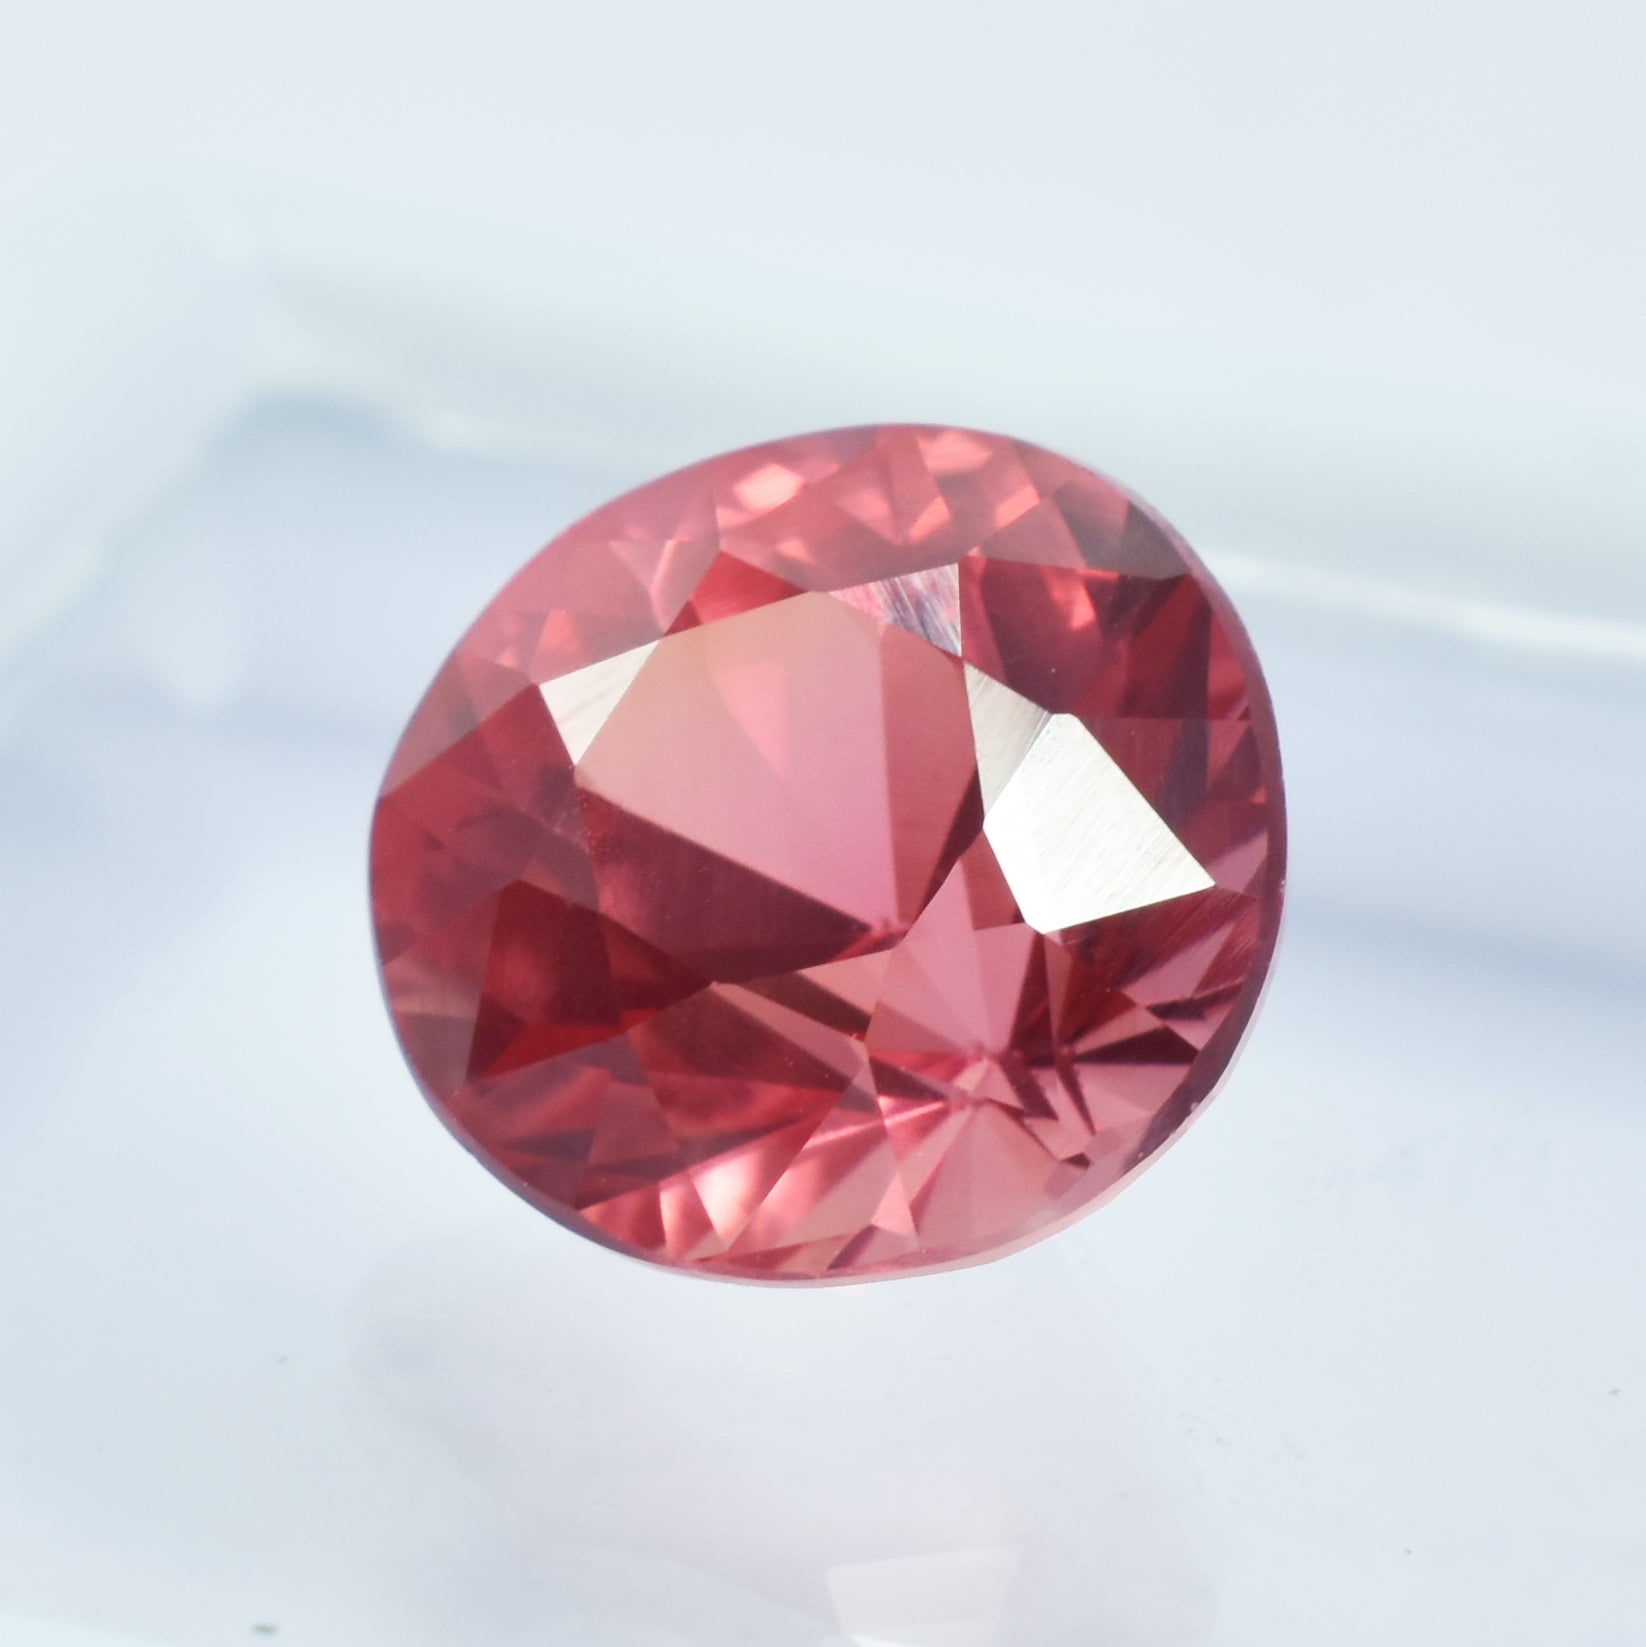 SAPPHIRE -  Improves Mental Clarity And Focus ,Certified Round Shape 9.65 Carat Natural Loose Gemstone Padparadscha Sapphire | Free Shipping With Extra Gift | Best Offer